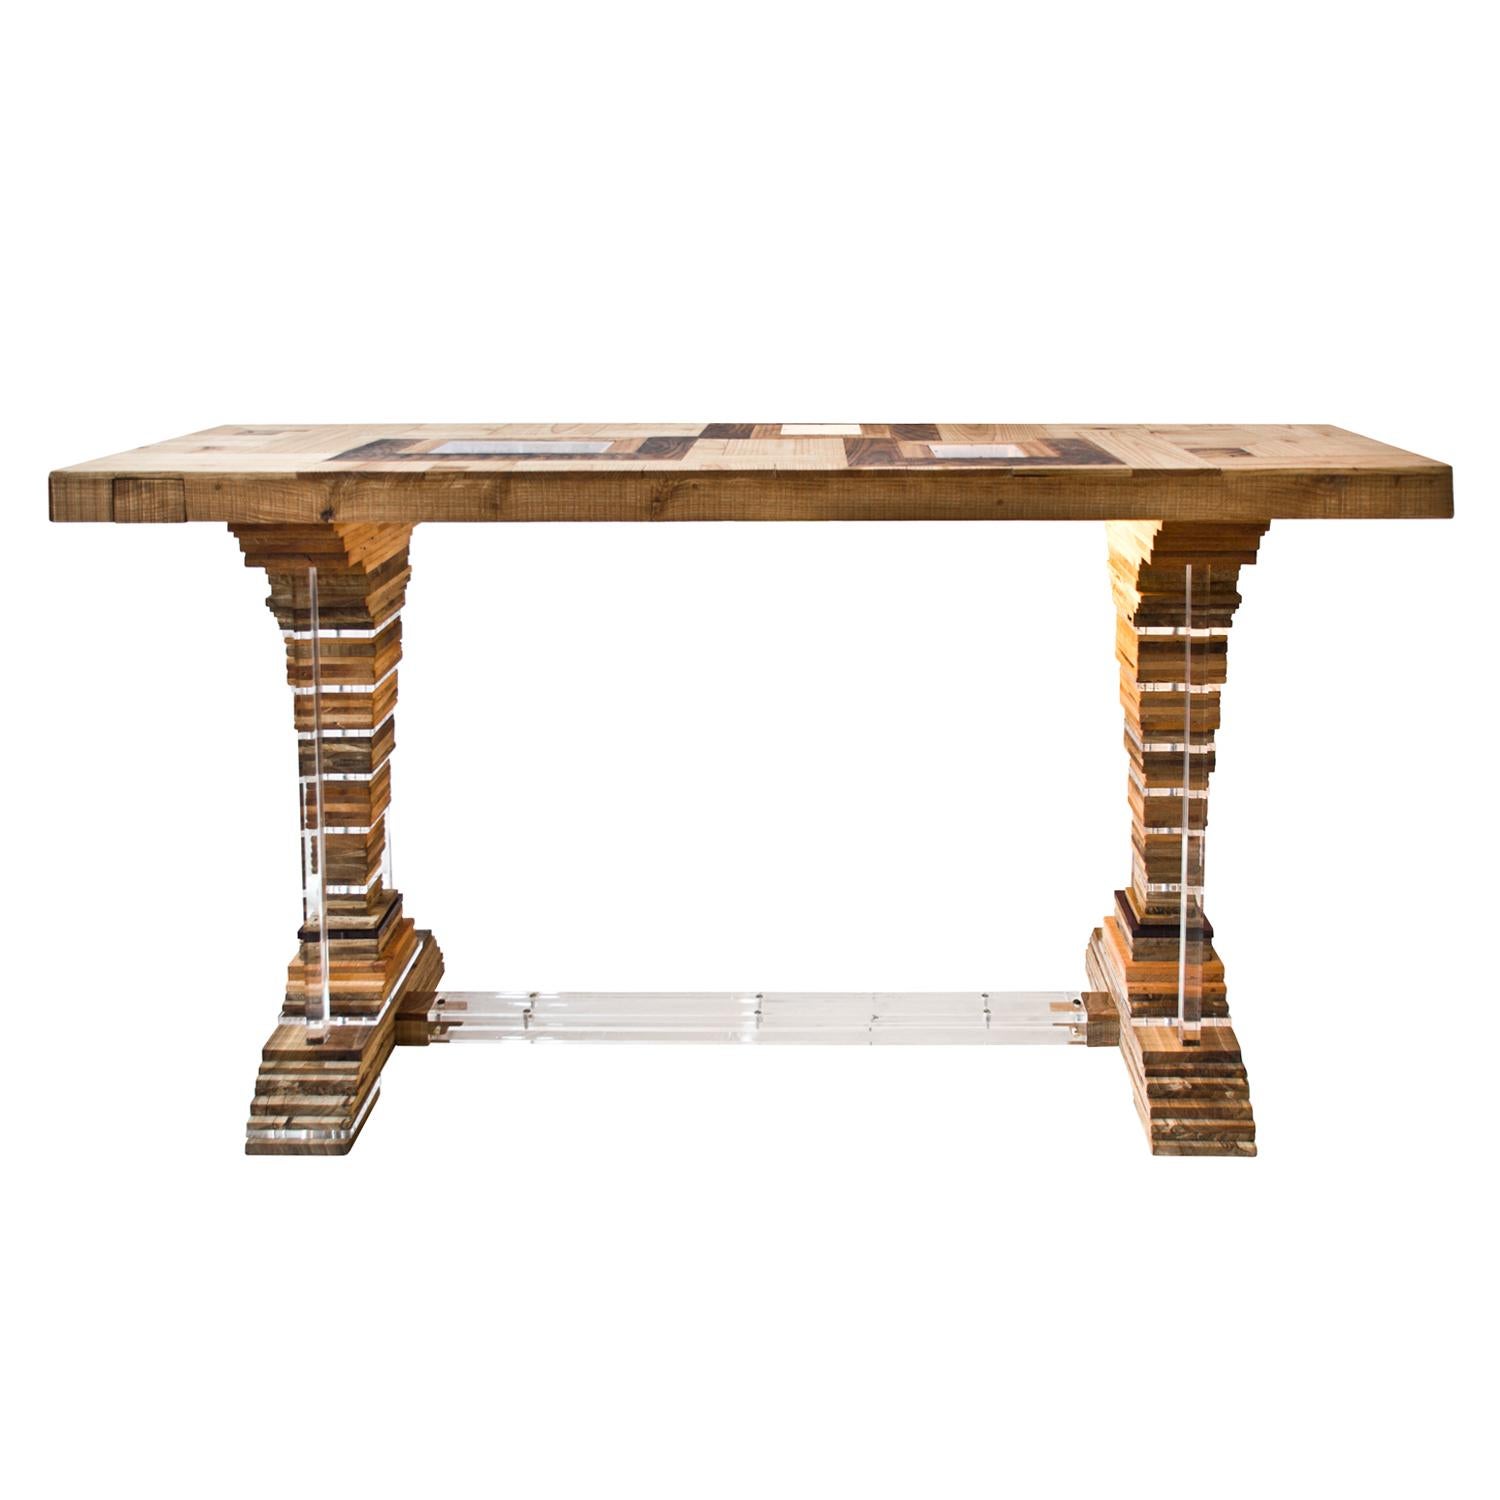 The small up]side[down console is made of handcrafted wood and plexiglass; the form of the two table legs remind a pyramidal trunk - typical of the 18th century - a chunky version of the Louis XVI style. As the title suggests, some elements can be